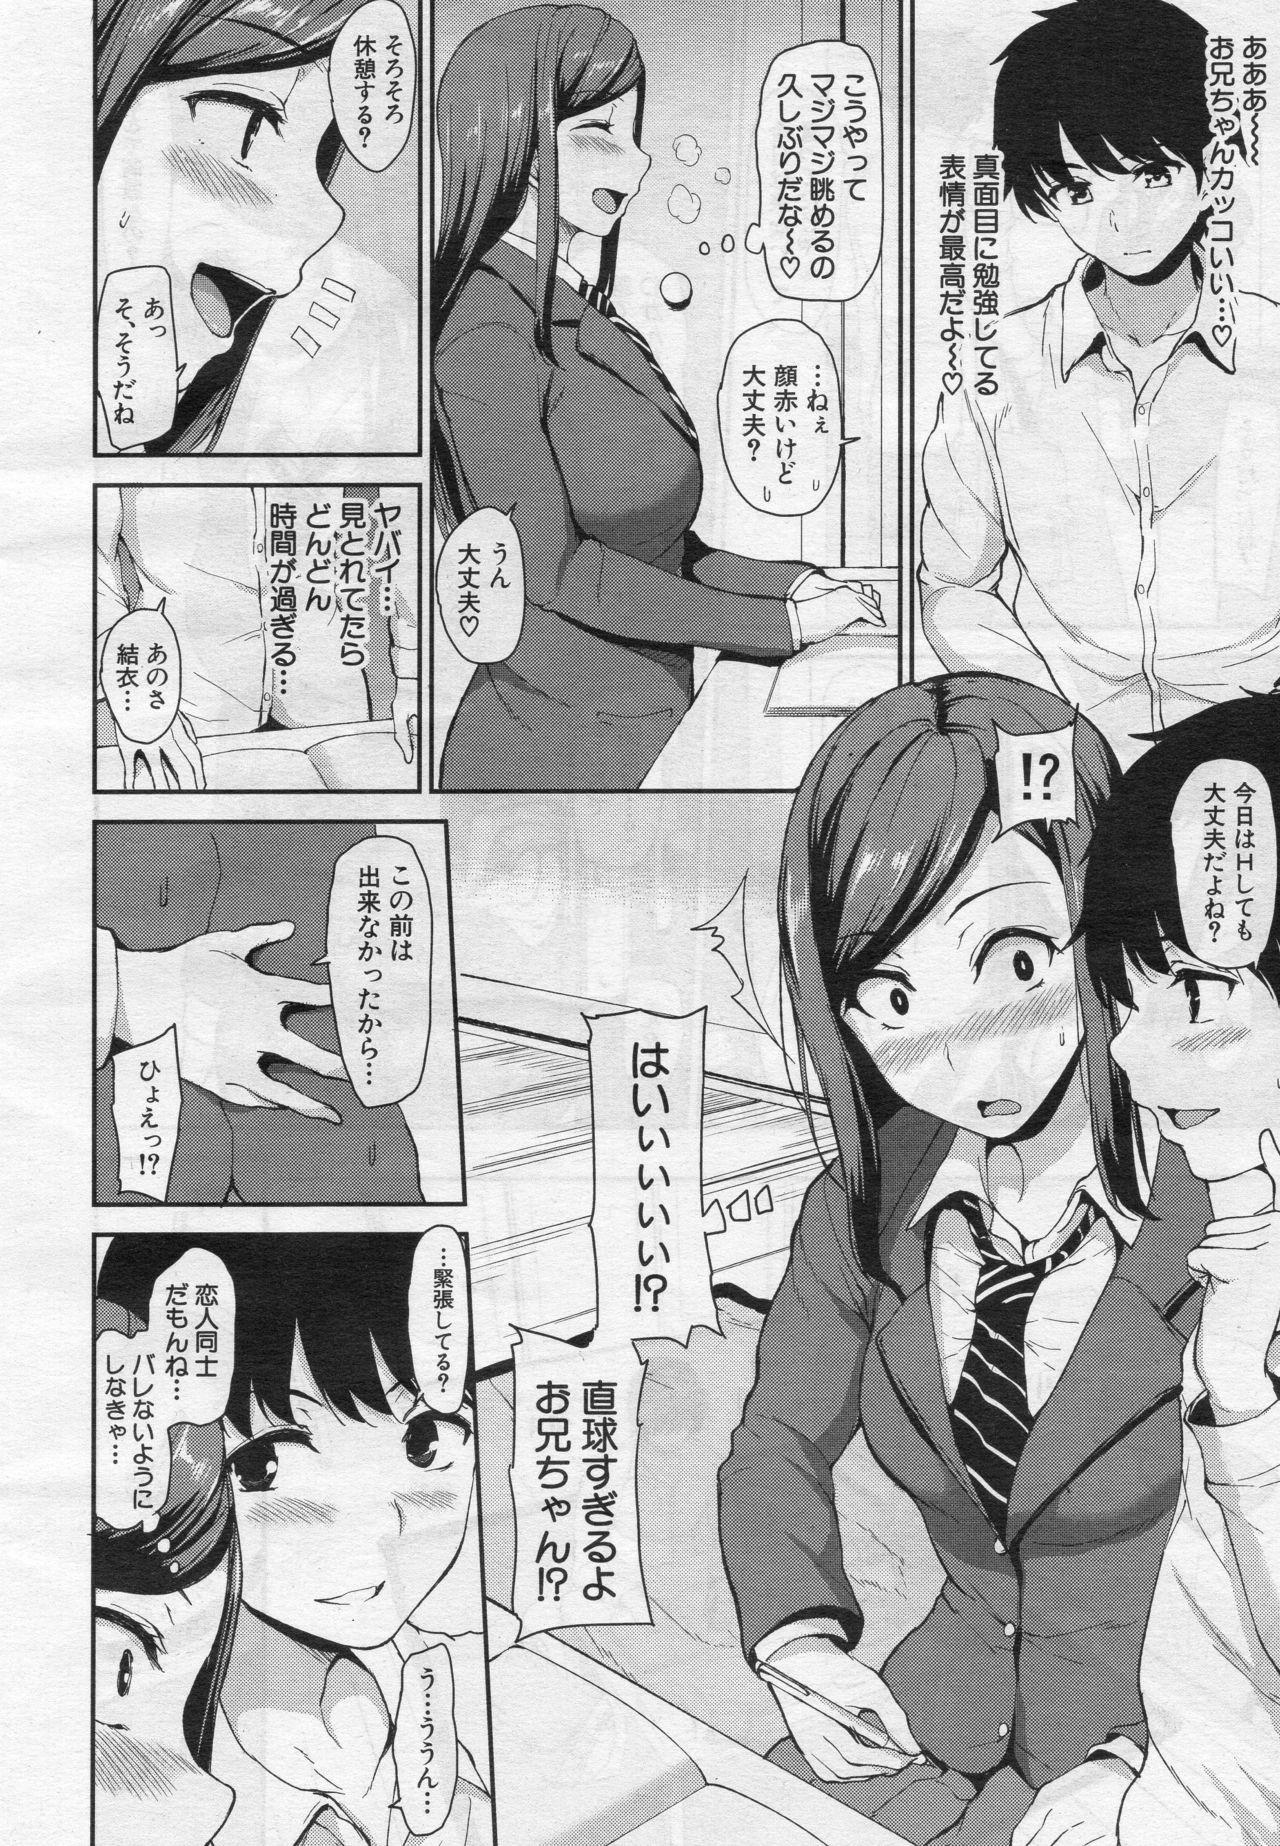 Australian Osananajimi to Imouto - A childhood friend and younger sister Model - Page 10